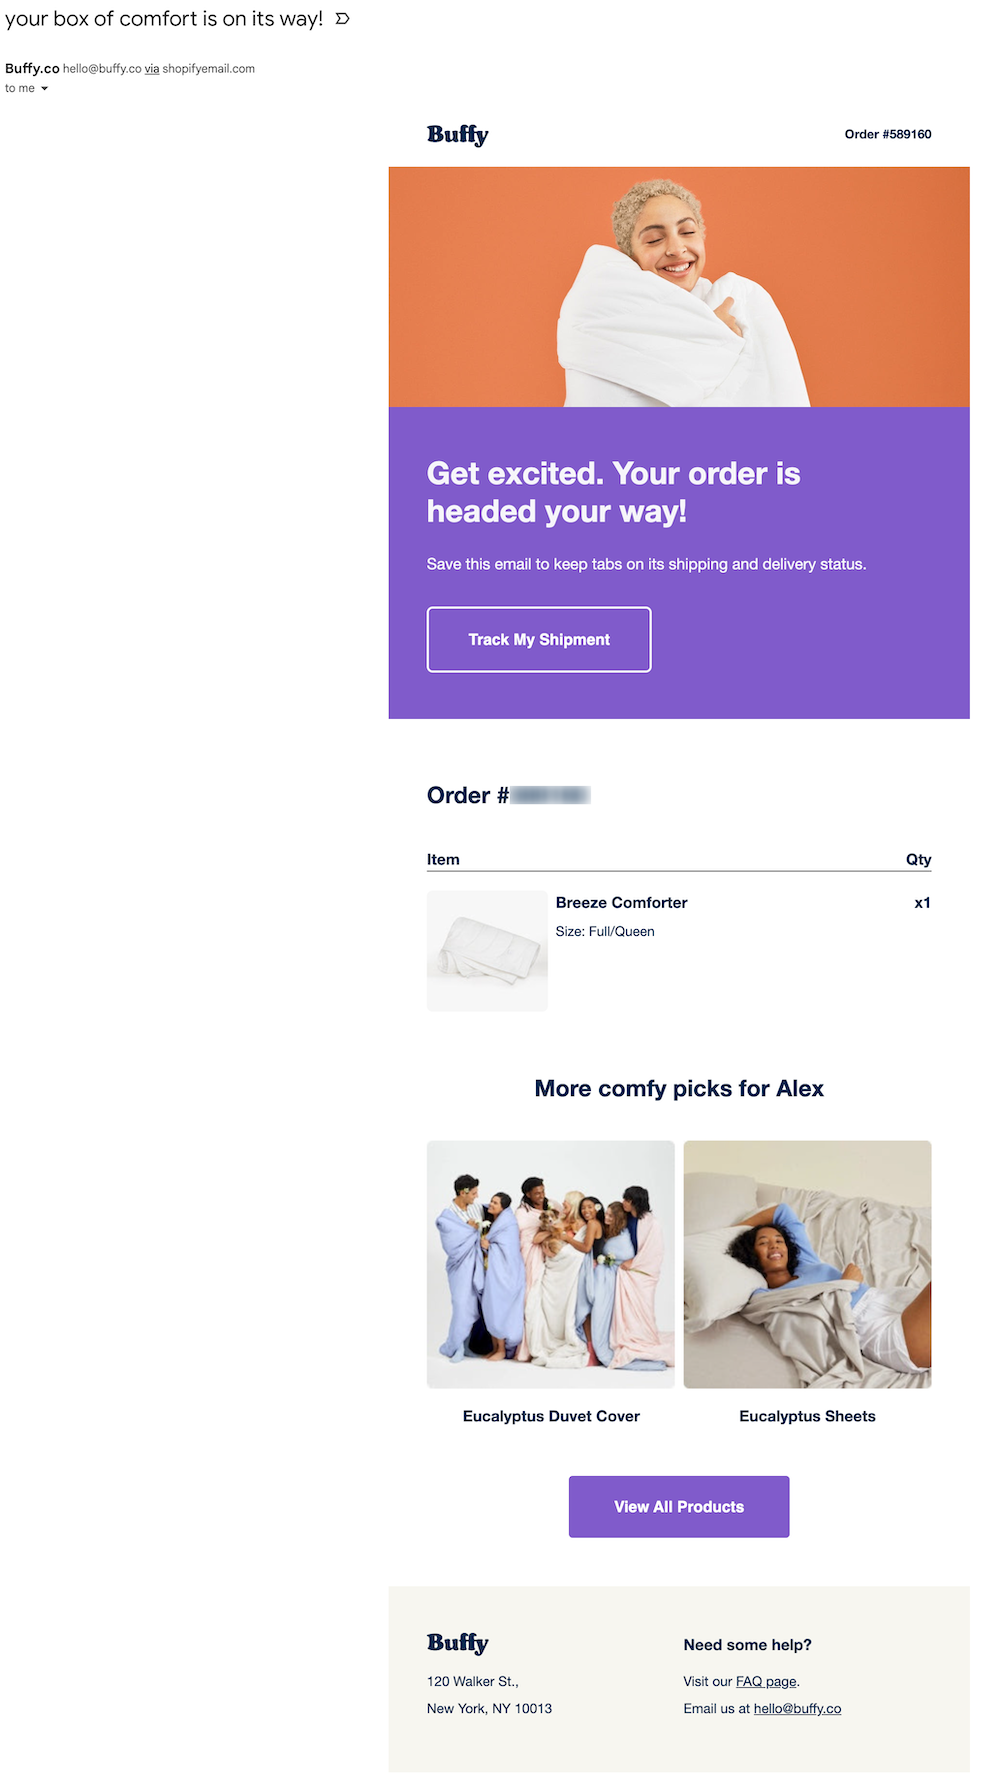 Buffy uses their shipping confirmation email to offer customers complementary products they might be interested in. The email design is clean and simple, highlighting the purchased product and branded lifestyle imagery but also including a recommendation section.